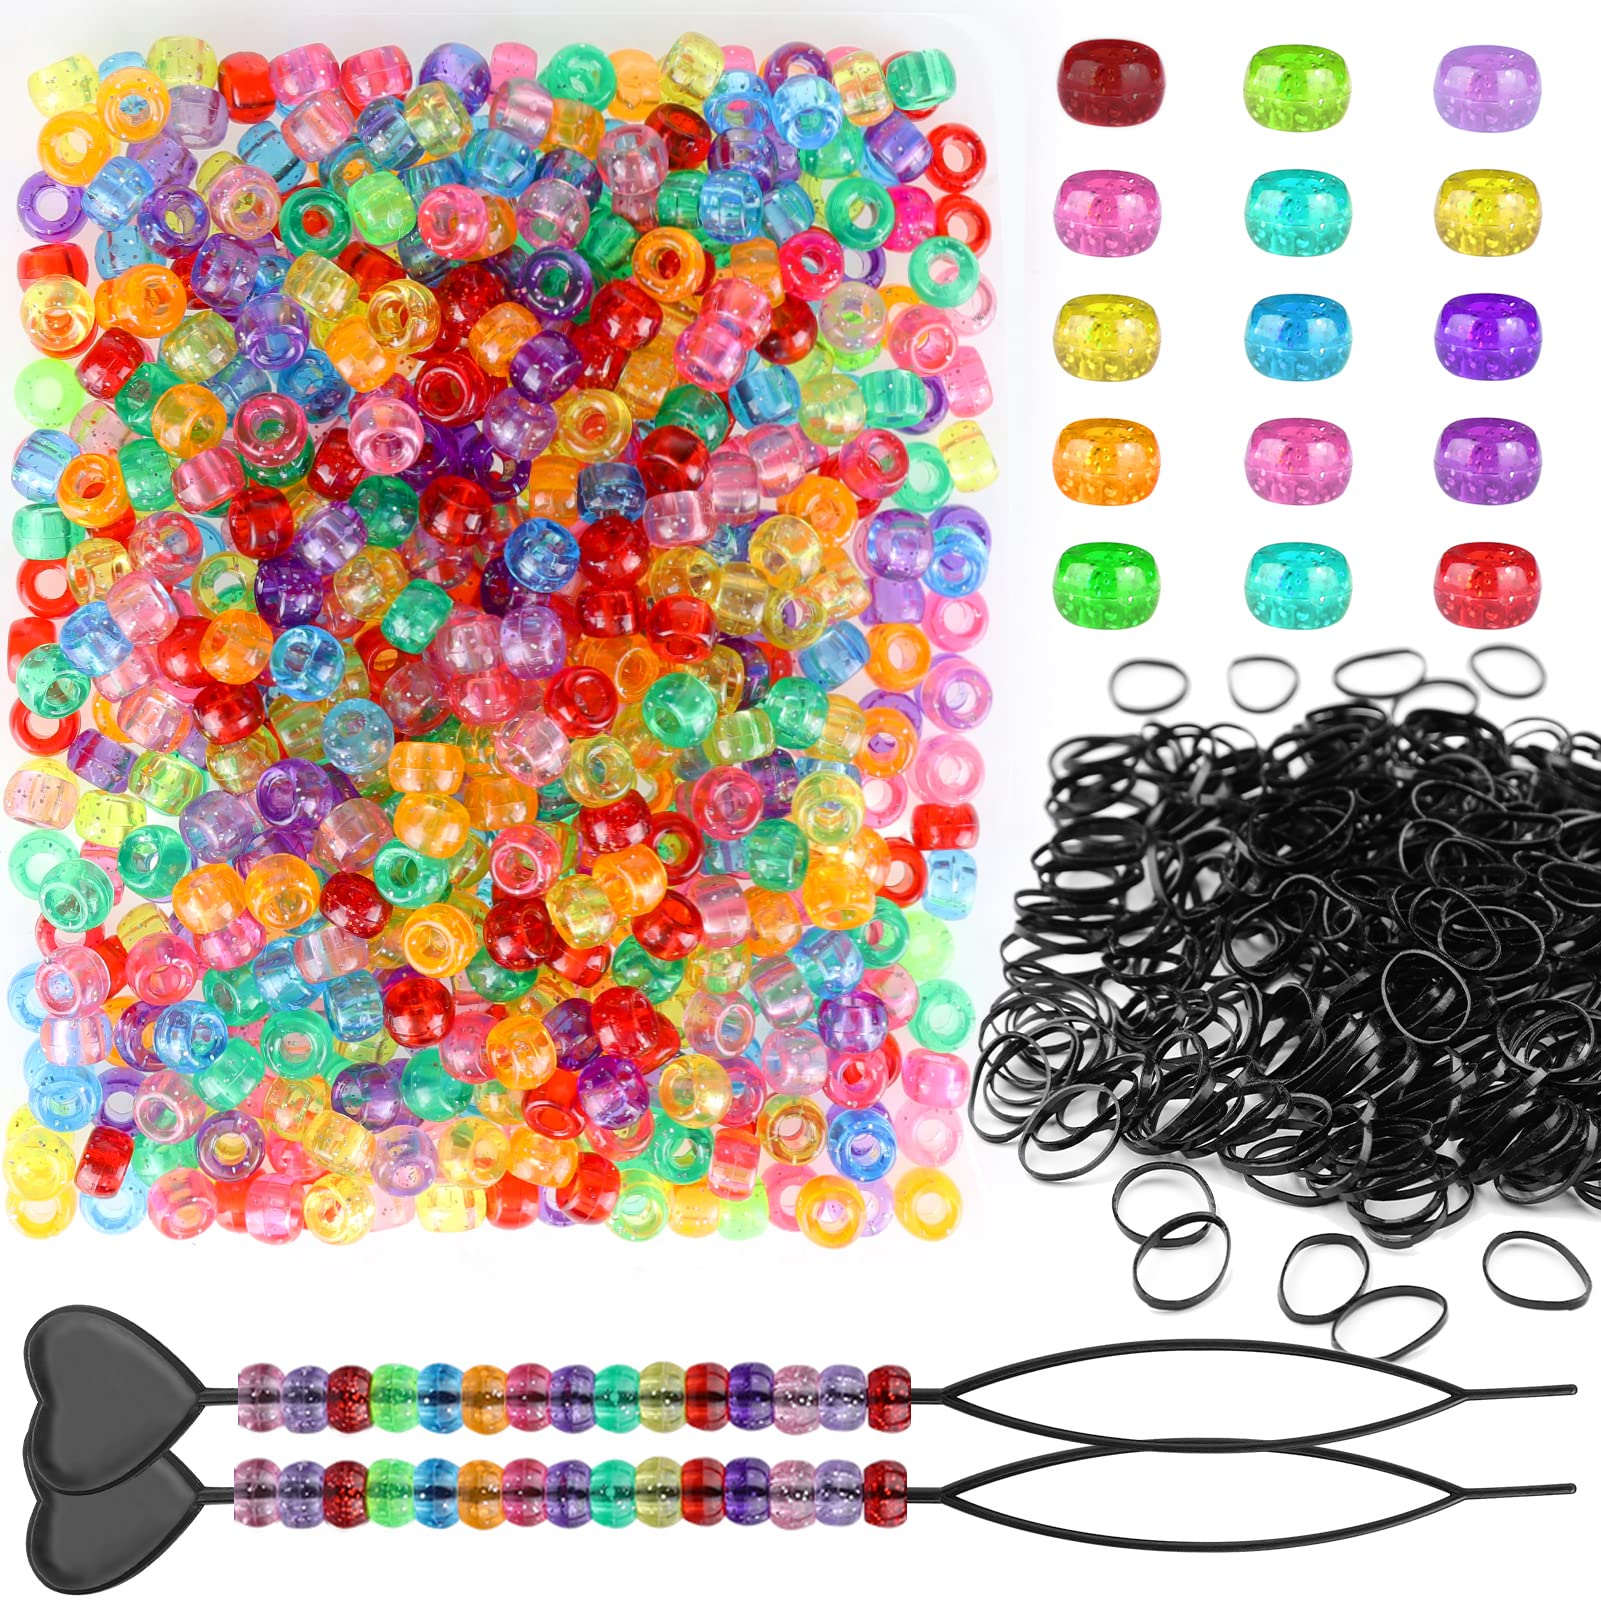 405 Pcs Hair Beads Set for Girls Hair Braids Including 200 Pcs 10x12mm  Multicolor Hair Beads 200 Pcs Elastic Rubber Bands and 5 Pcs Quick Beader  Hair